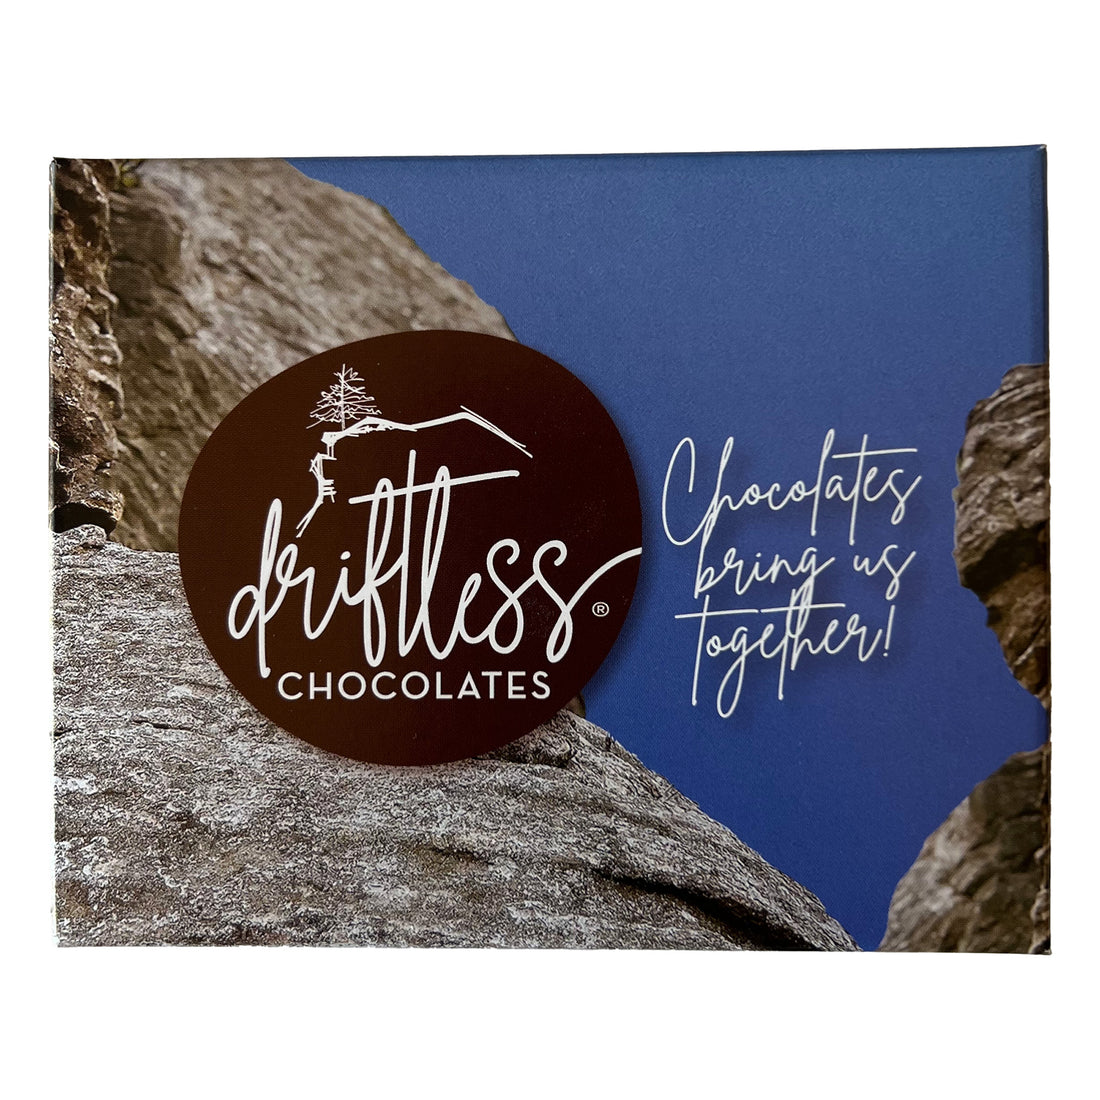 Driftless Chocolates 12 piece Assorted Truffles and Bonbons. Photo is of Donald Rock outside Mount Horeb Wisconsin